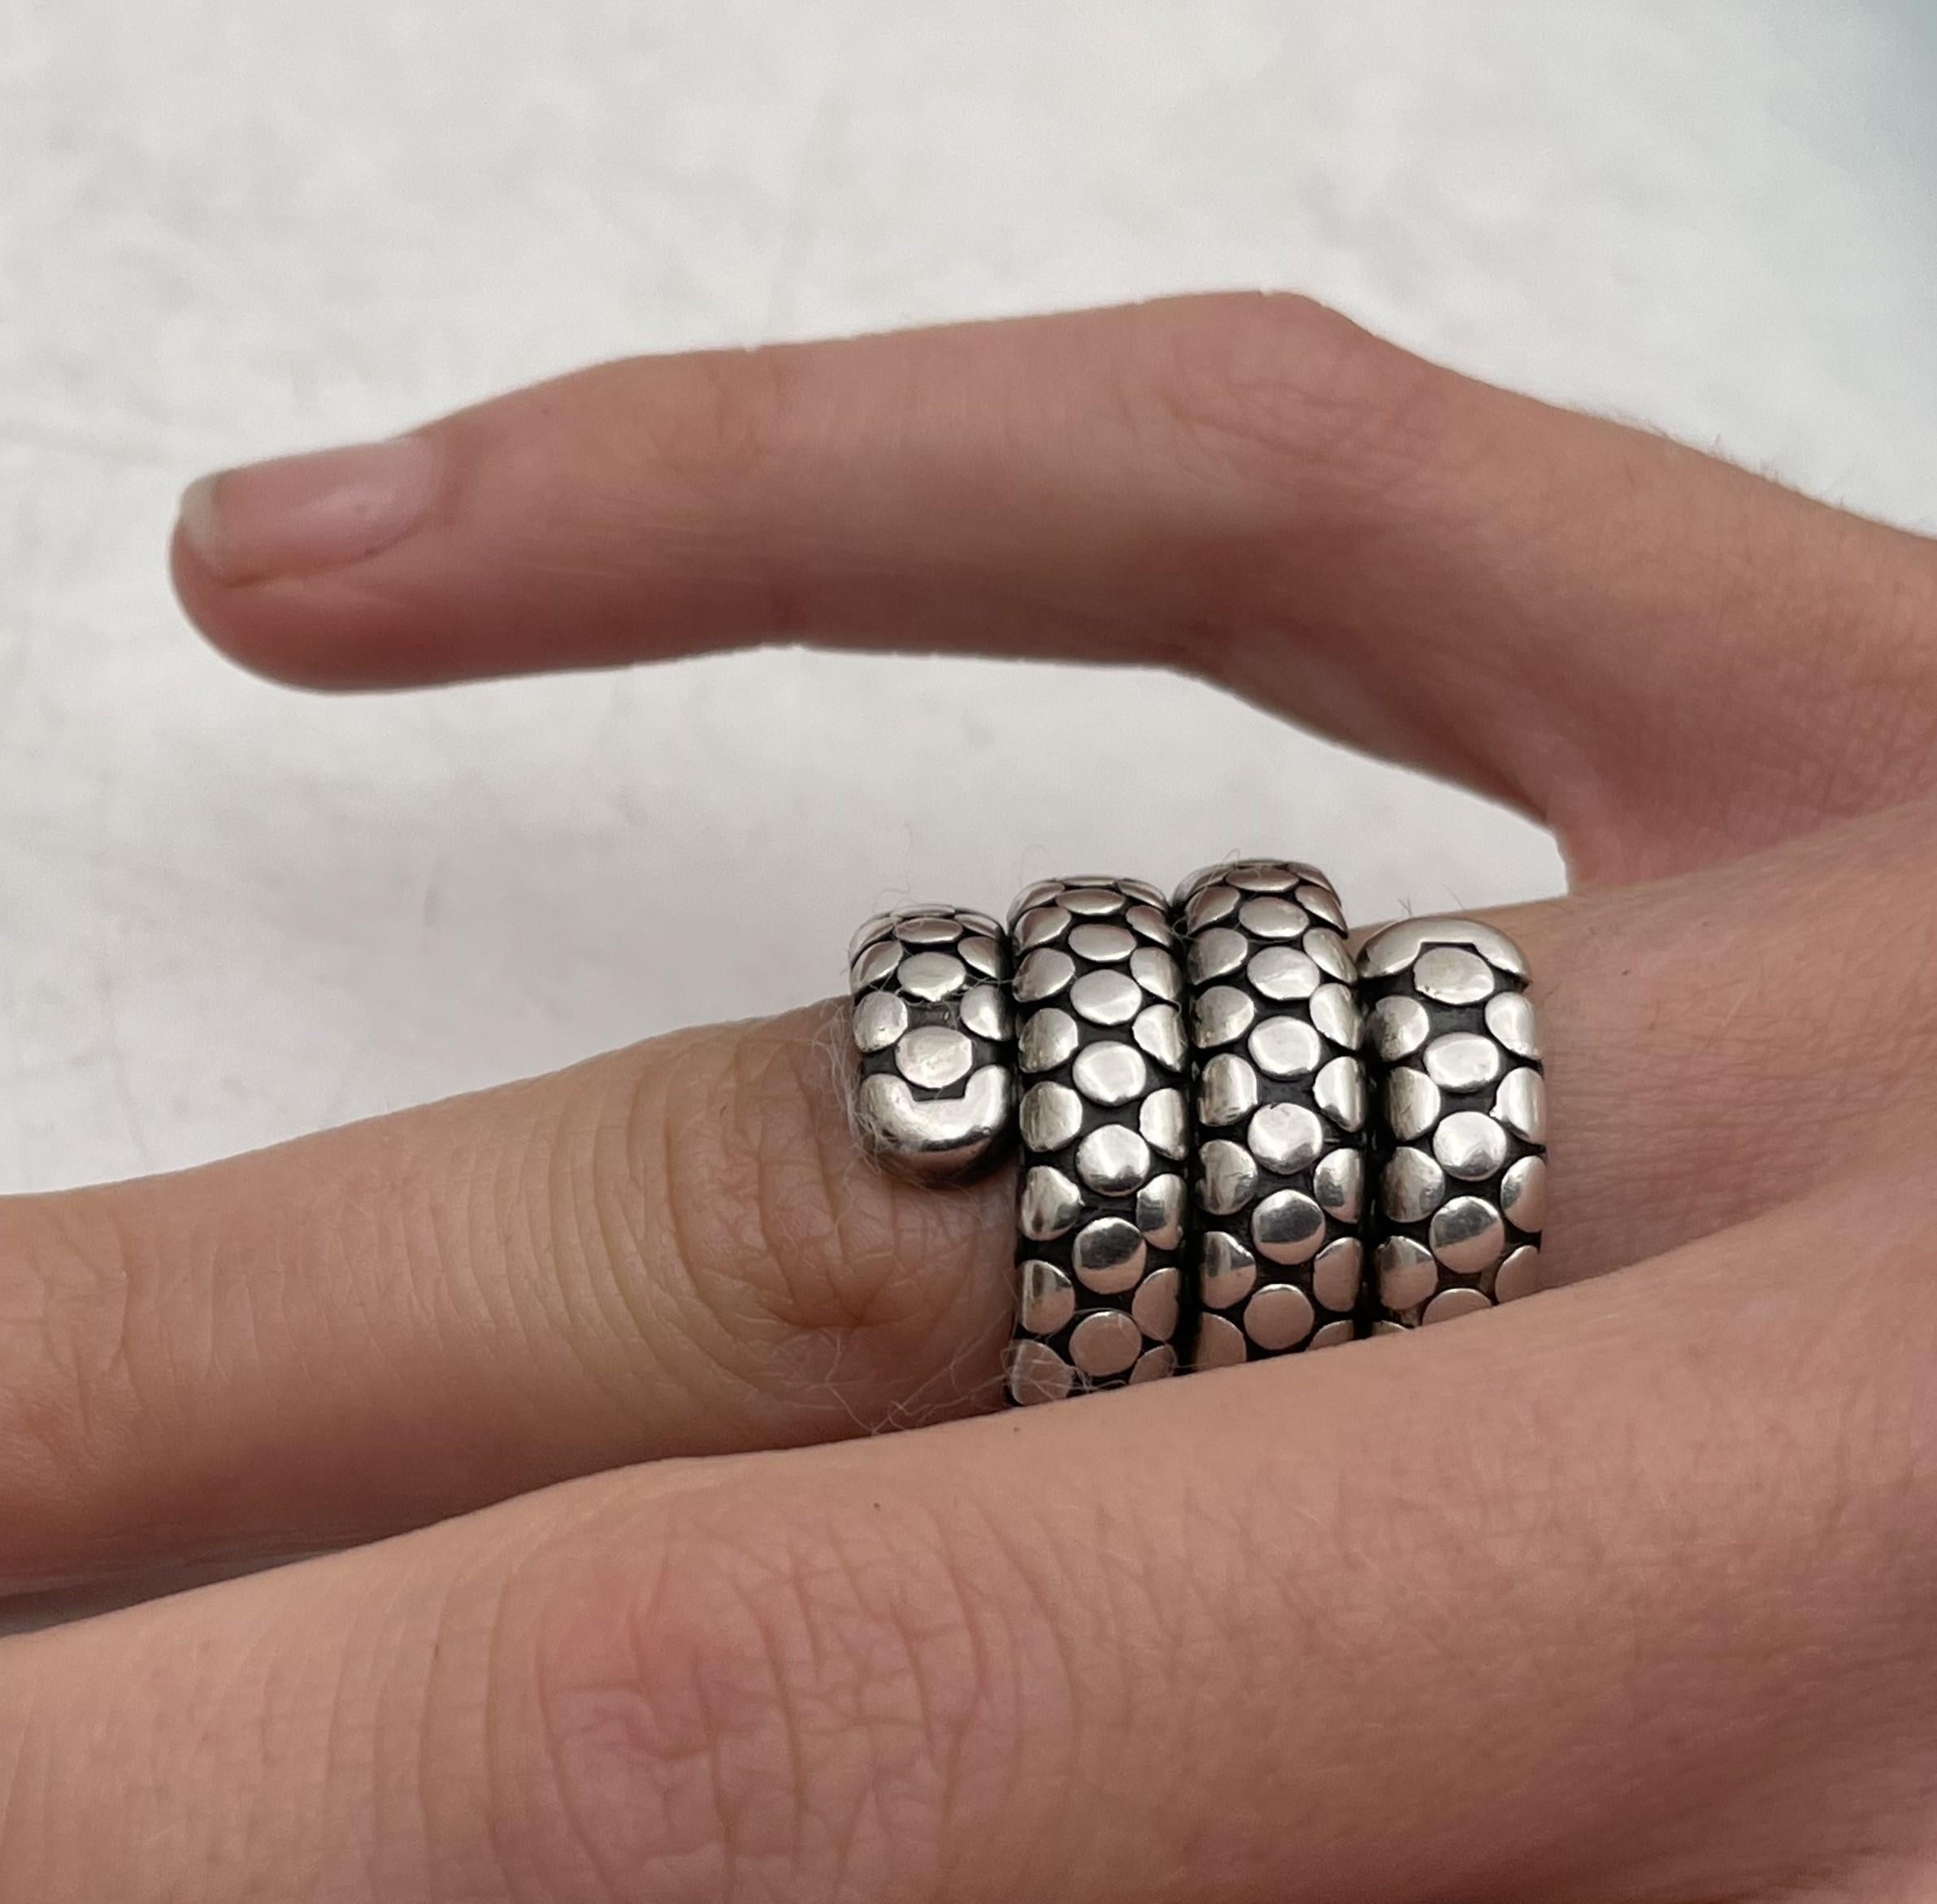 John Hardy sterling silver 3-coil dot flex wrap ring. It measures 7/8'' in expandable diameter by 7/8'' in height and bears hallmarks as shown. 

Please feel free to ask us any questions, and please see our other listings. 